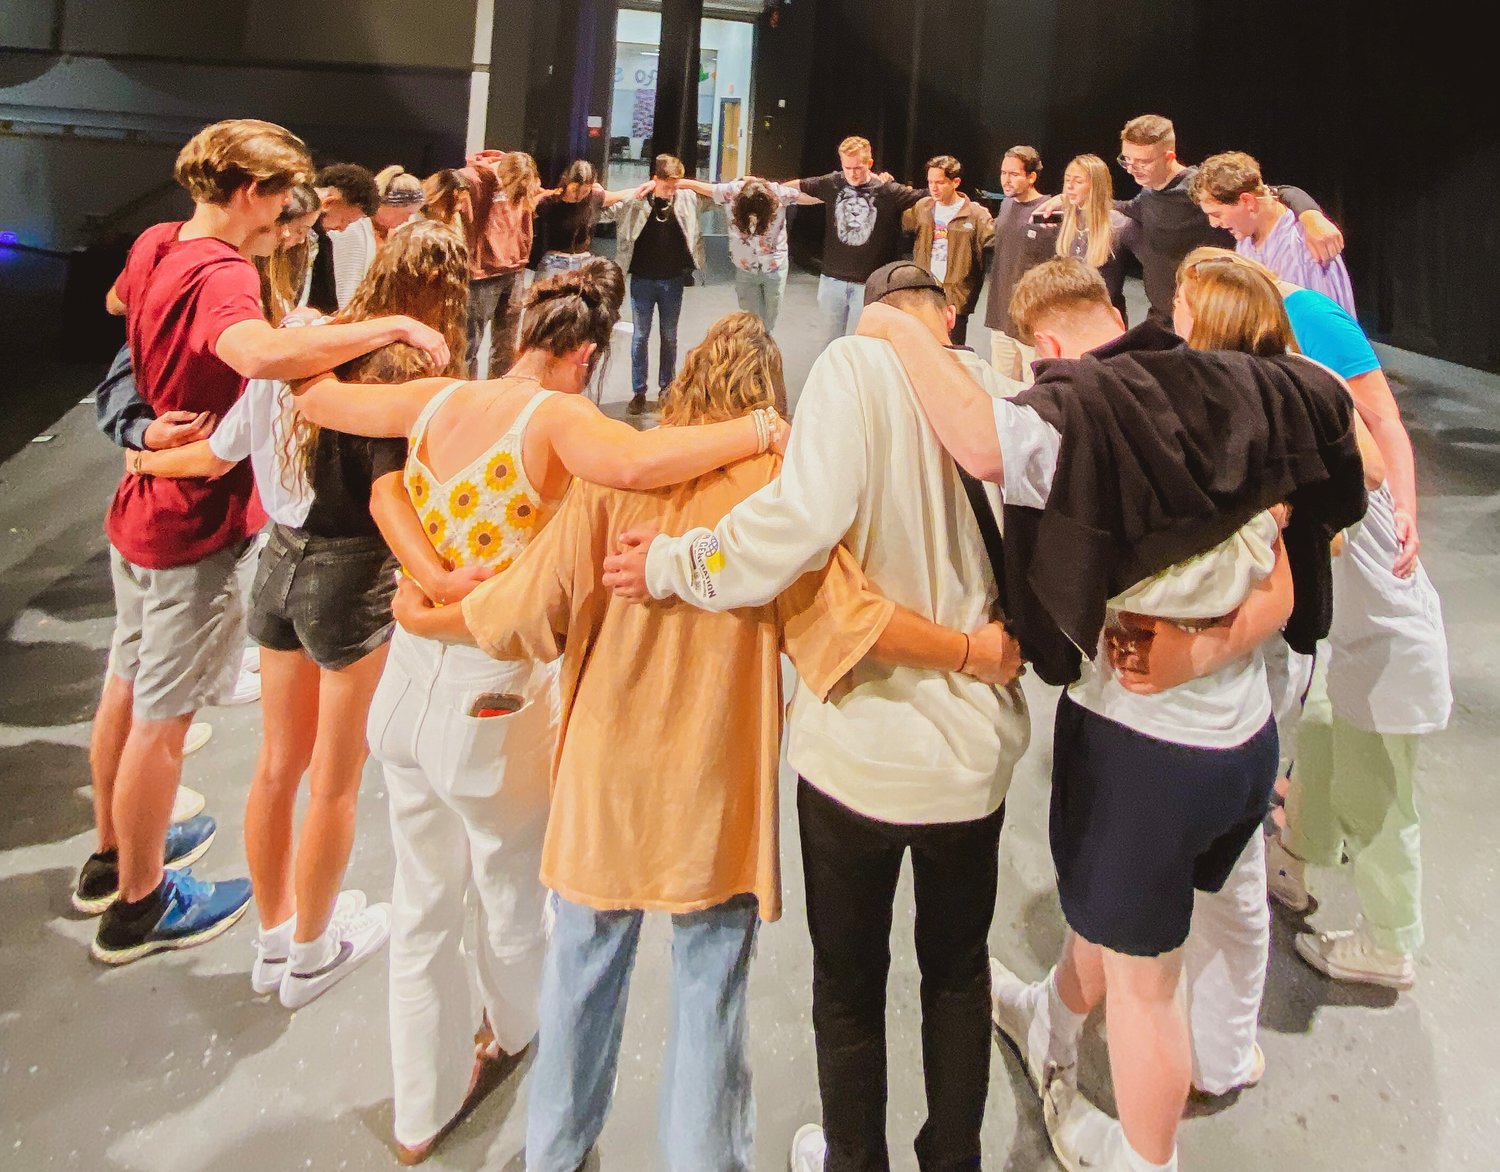 HowToLife Praying group
CONTRIBUTED PHOTO
Prayer is a high priority for every HowToLife student leadership team.  This Orlando, Florida group prayed for God to move powerfully in the hearts and lives of all who attended the event that night.